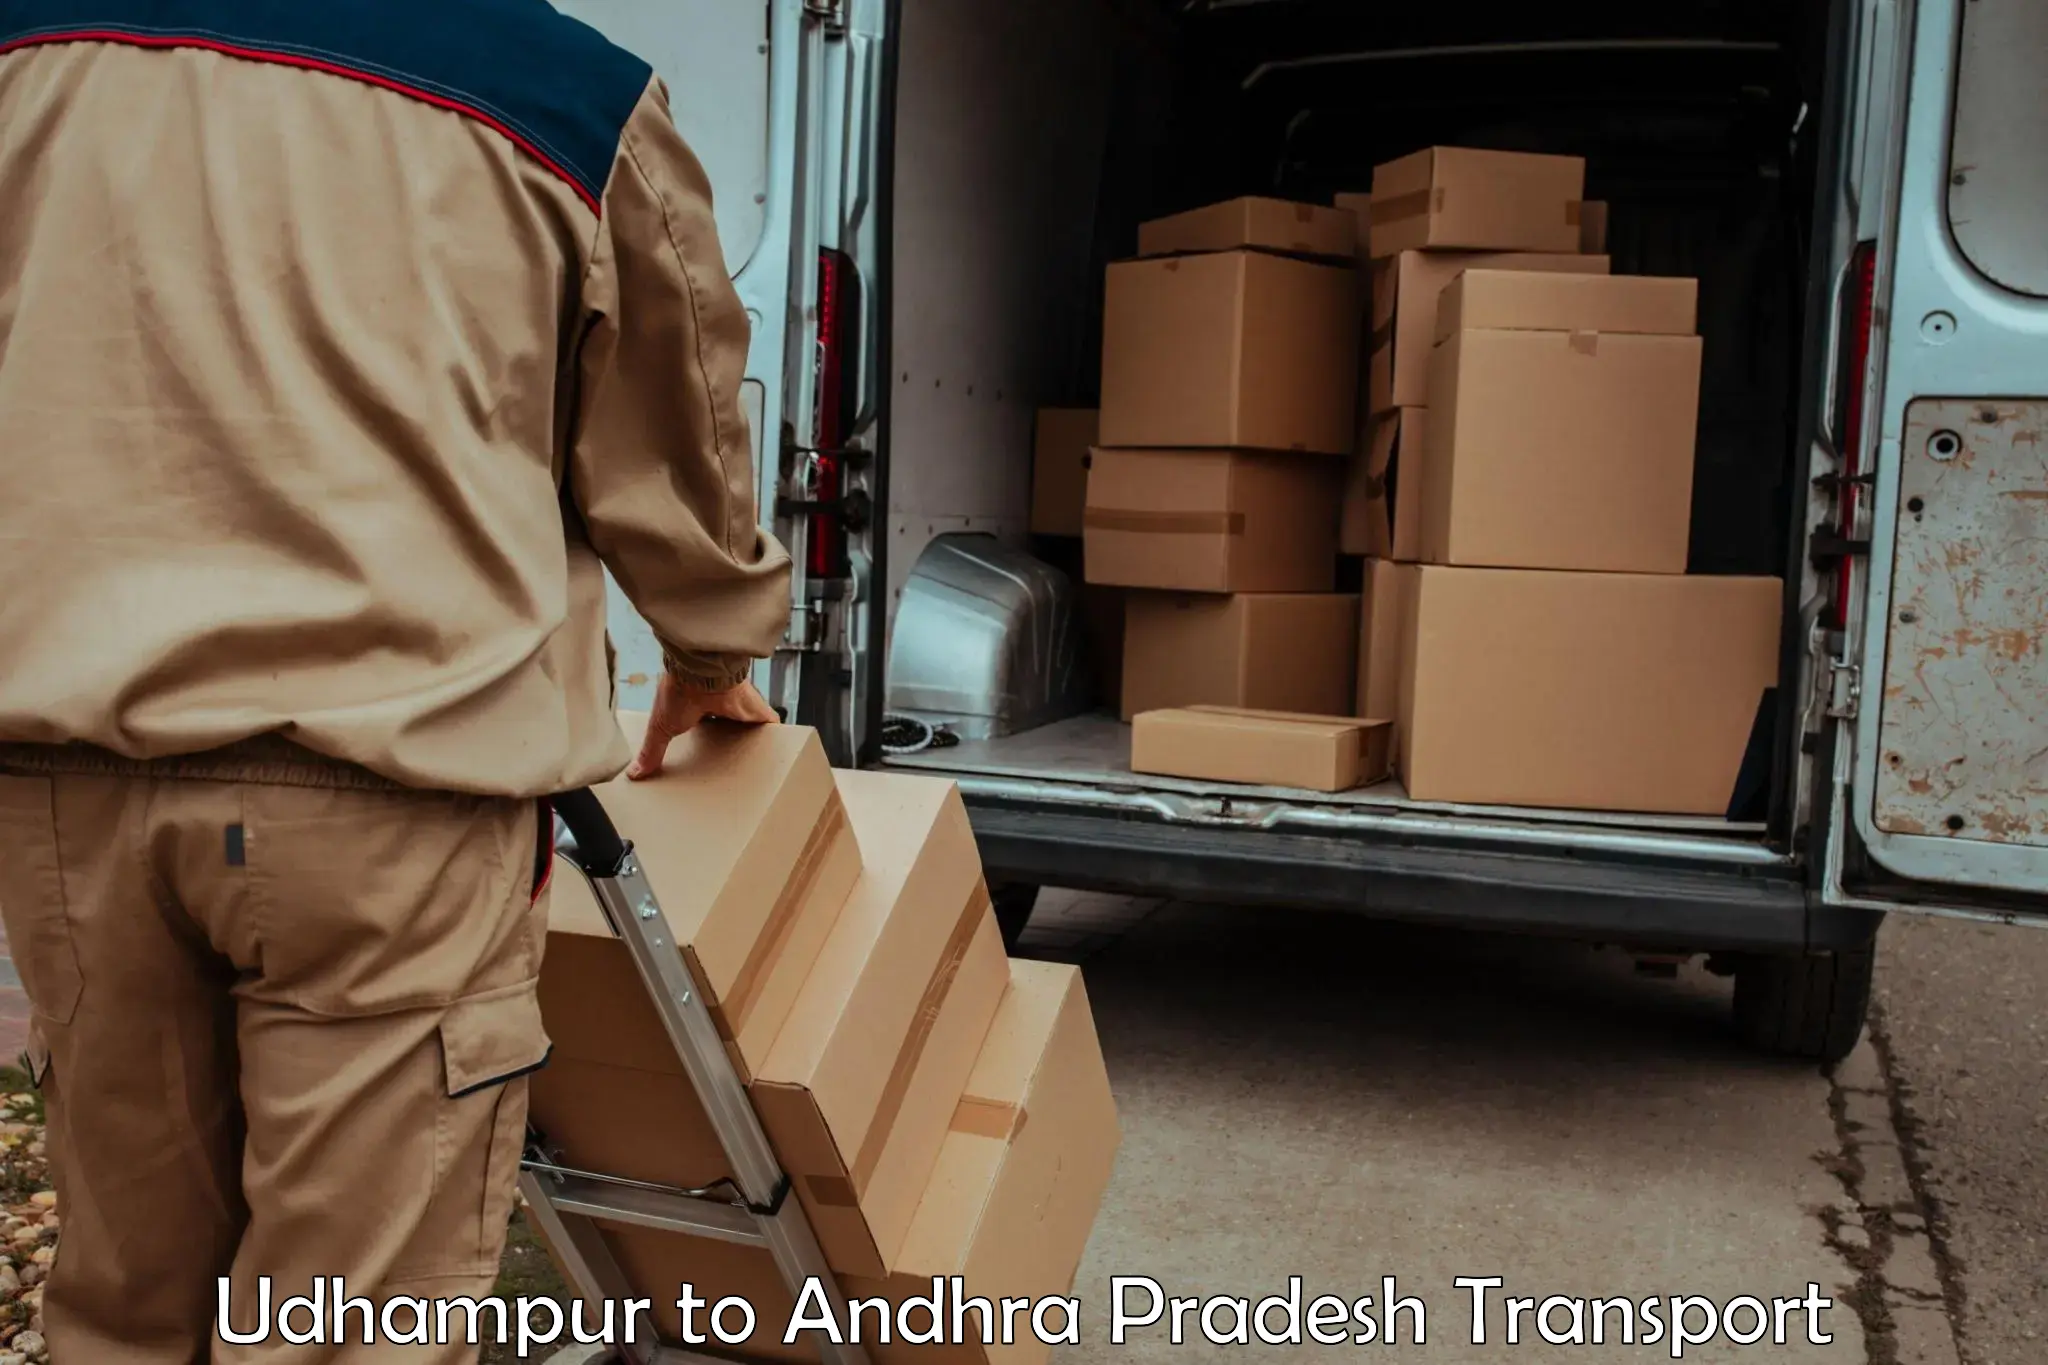 Shipping services Udhampur to Visakhapatnam Port